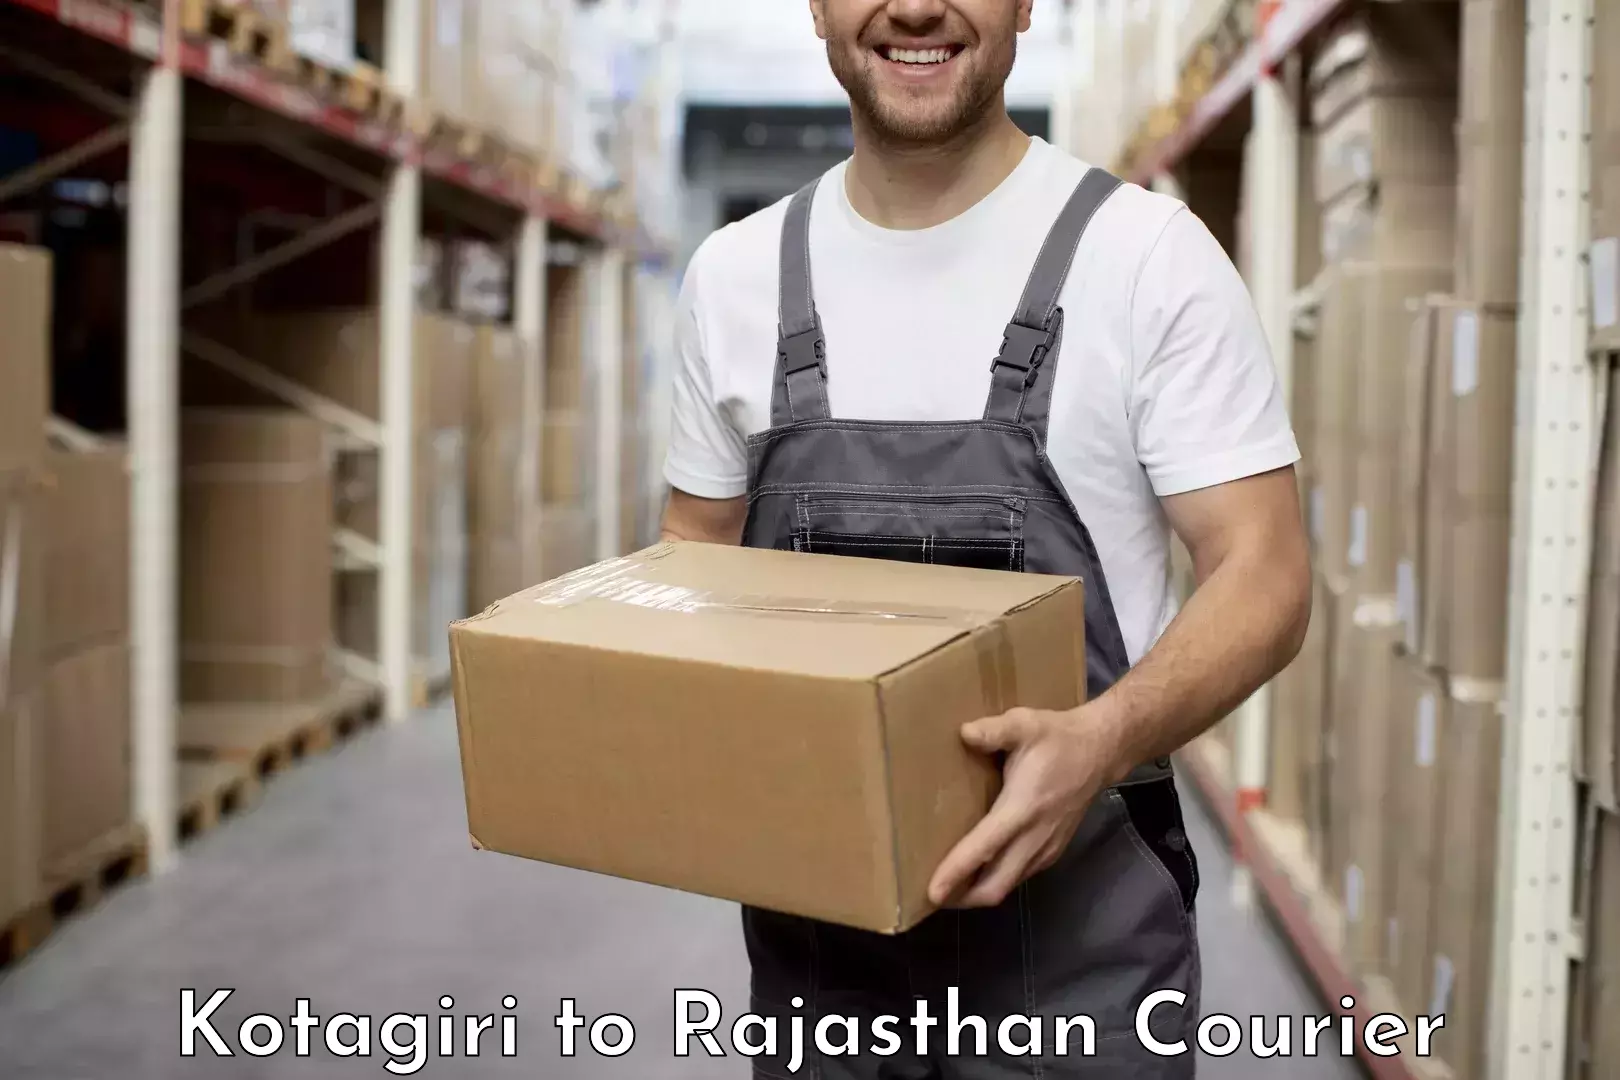 On-call courier service Kotagiri to Rajasthan